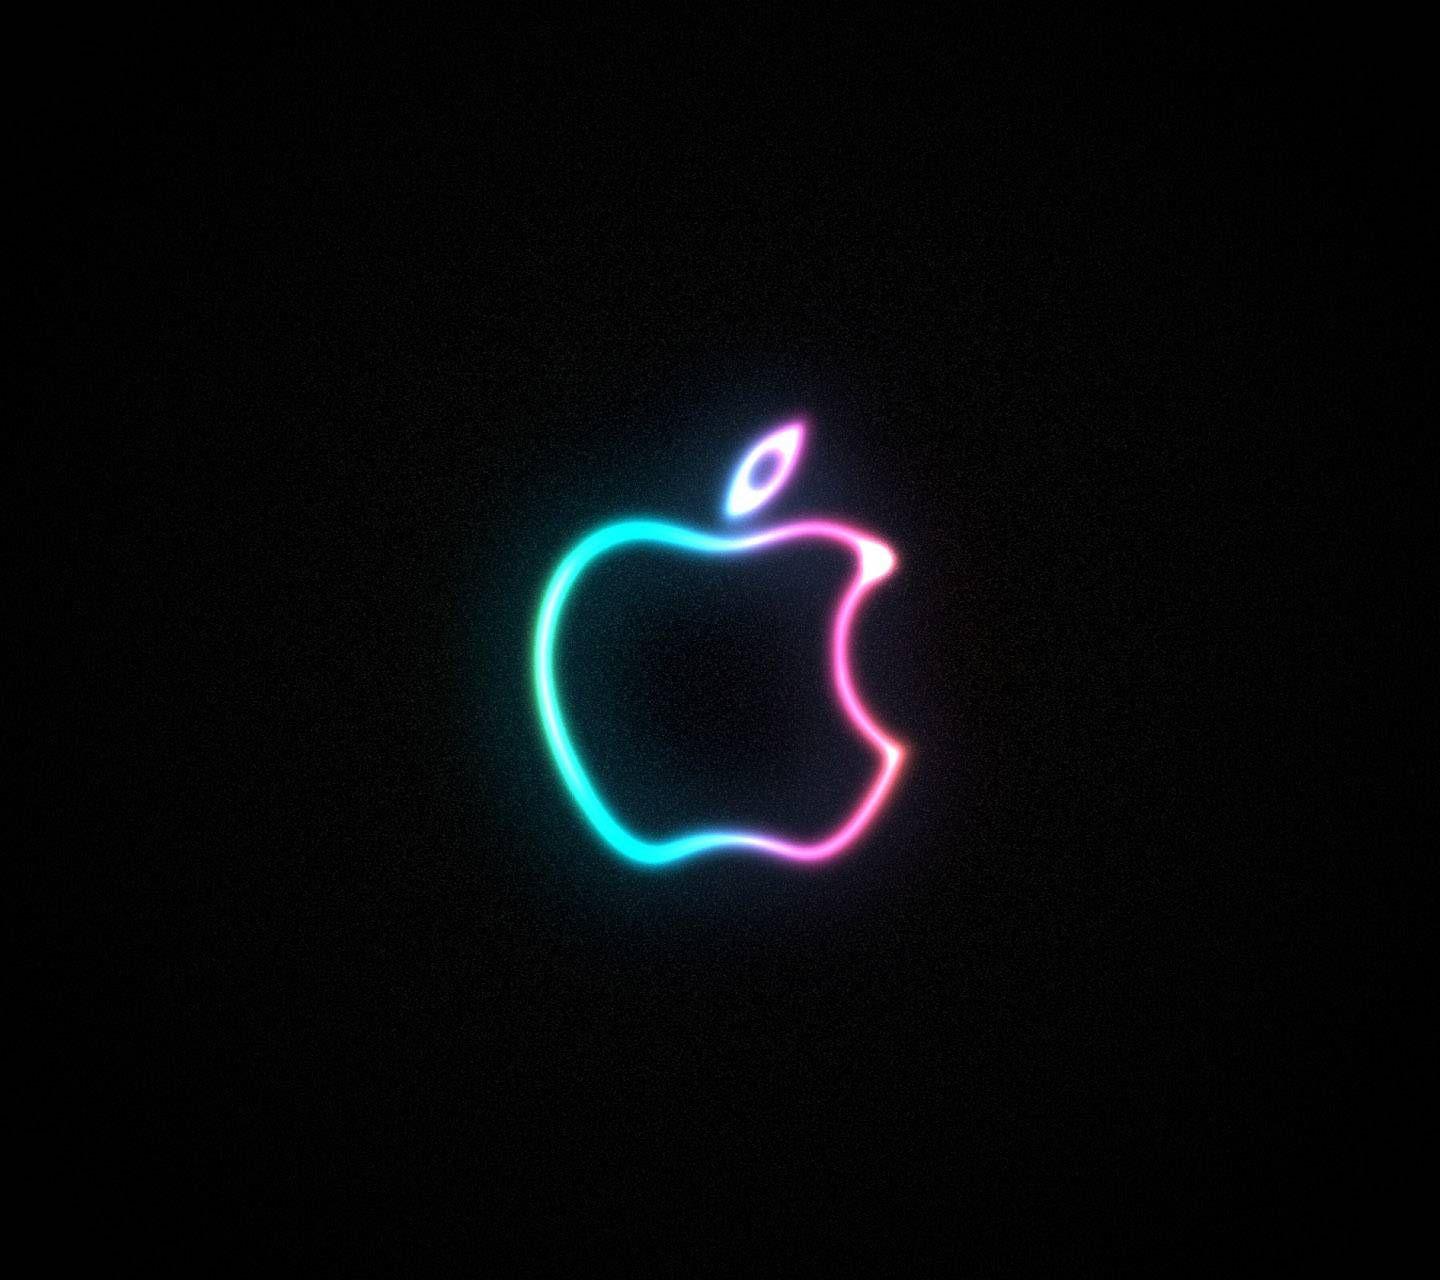 Apple Logo Wallpapers - Top Free Apple Logo Backgrounds ...